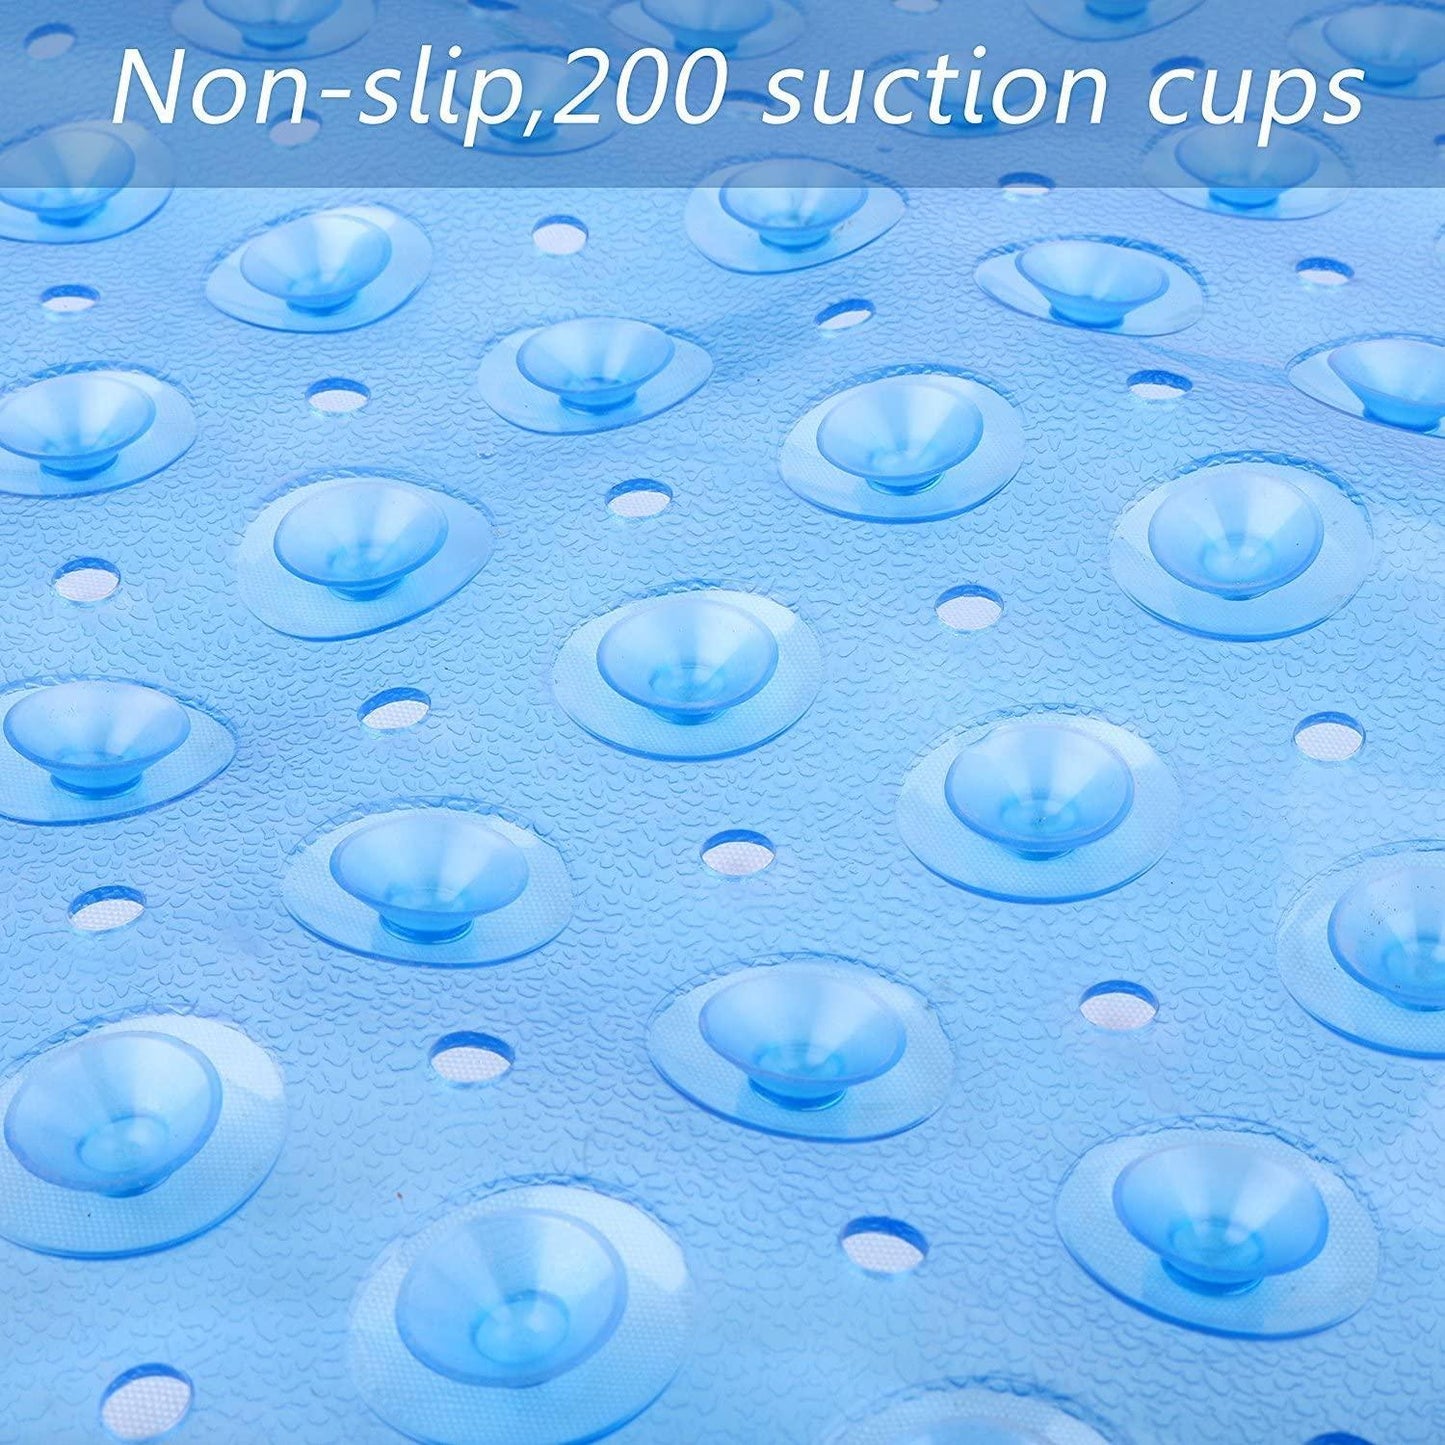 Extra Long Bath Mats, Shower Mats Mildew Resistant Non-slip Pebbled Bathtub Mats with Suction Cup for Bathroom, Machine Washable, 100 x 40cm Wintory